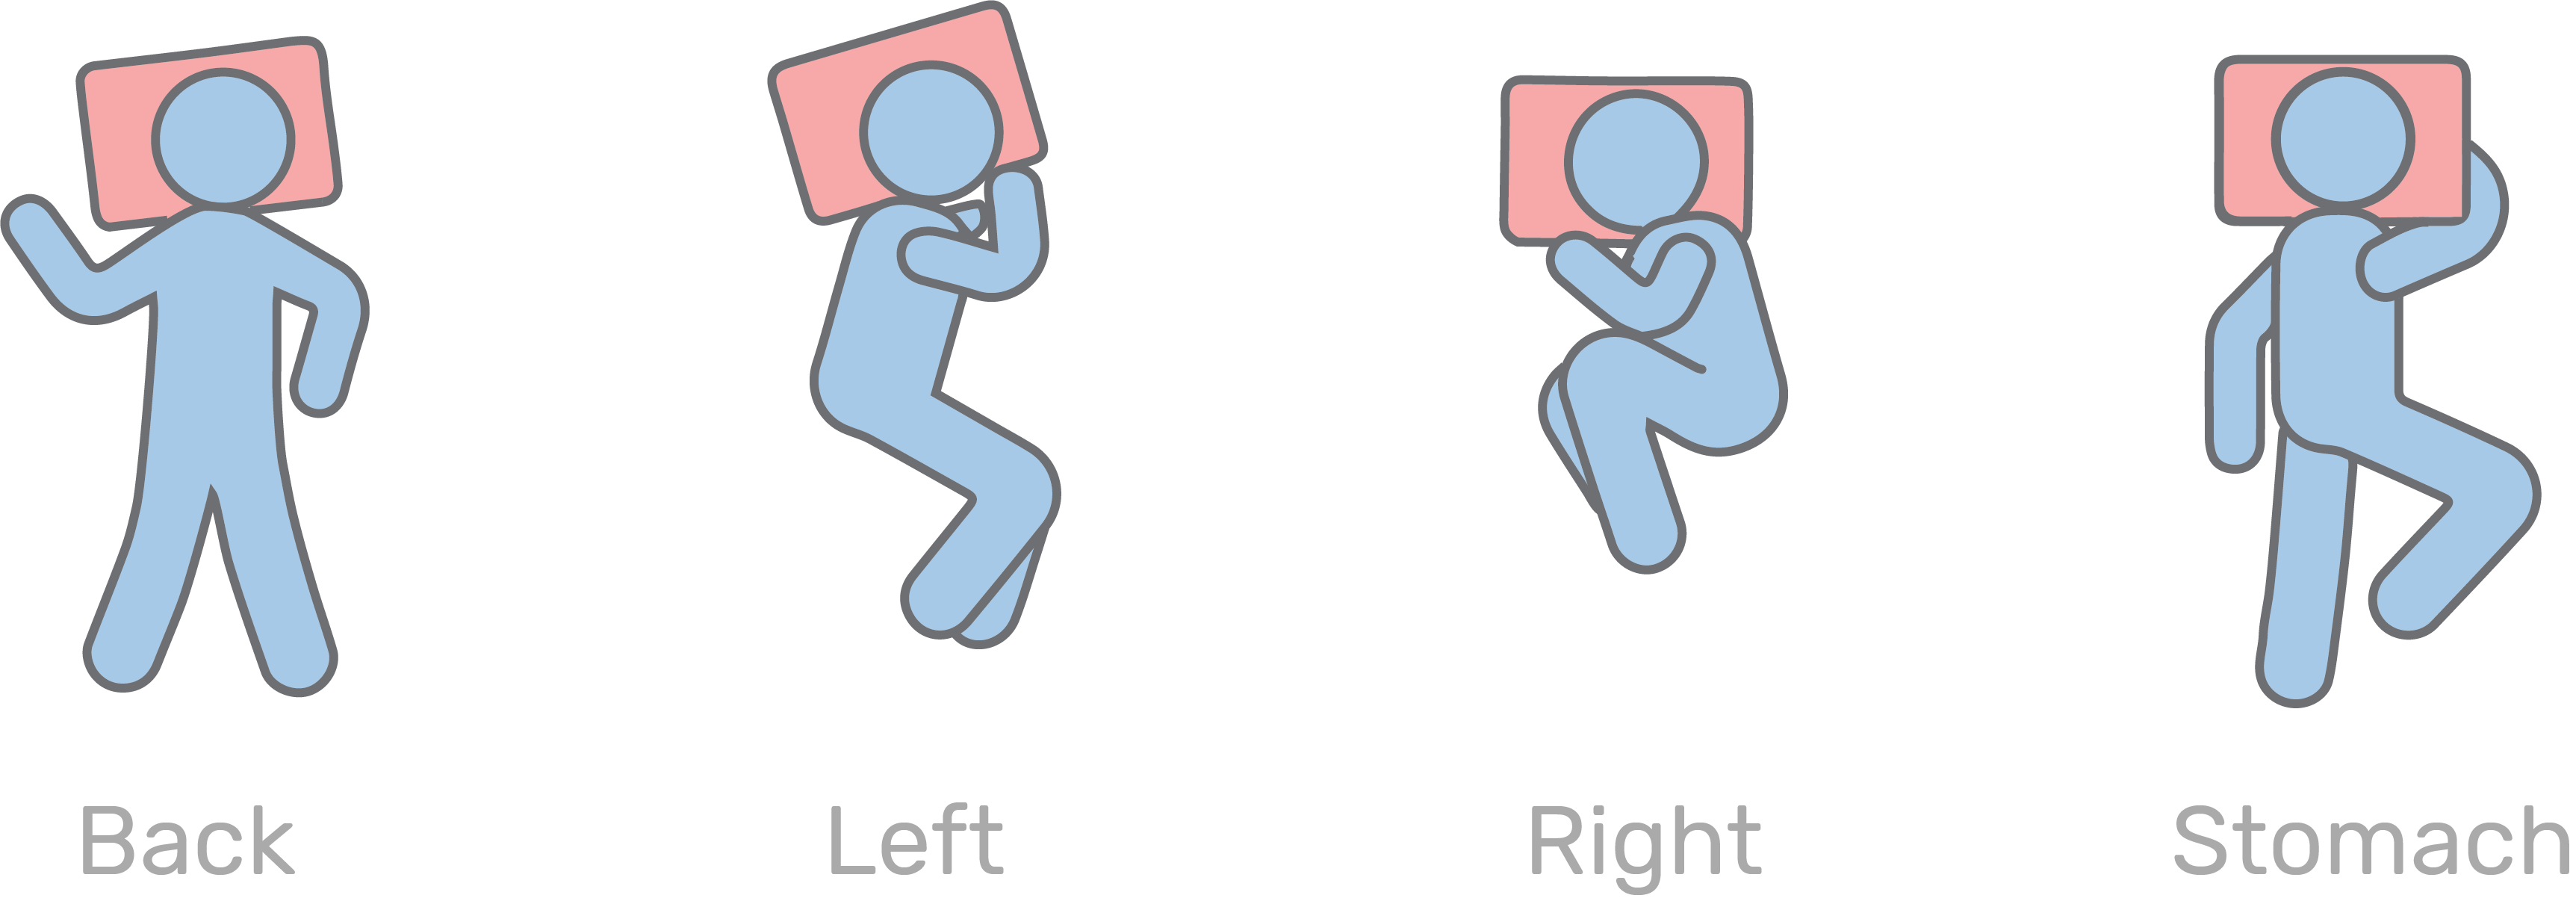 pillow_positions.png